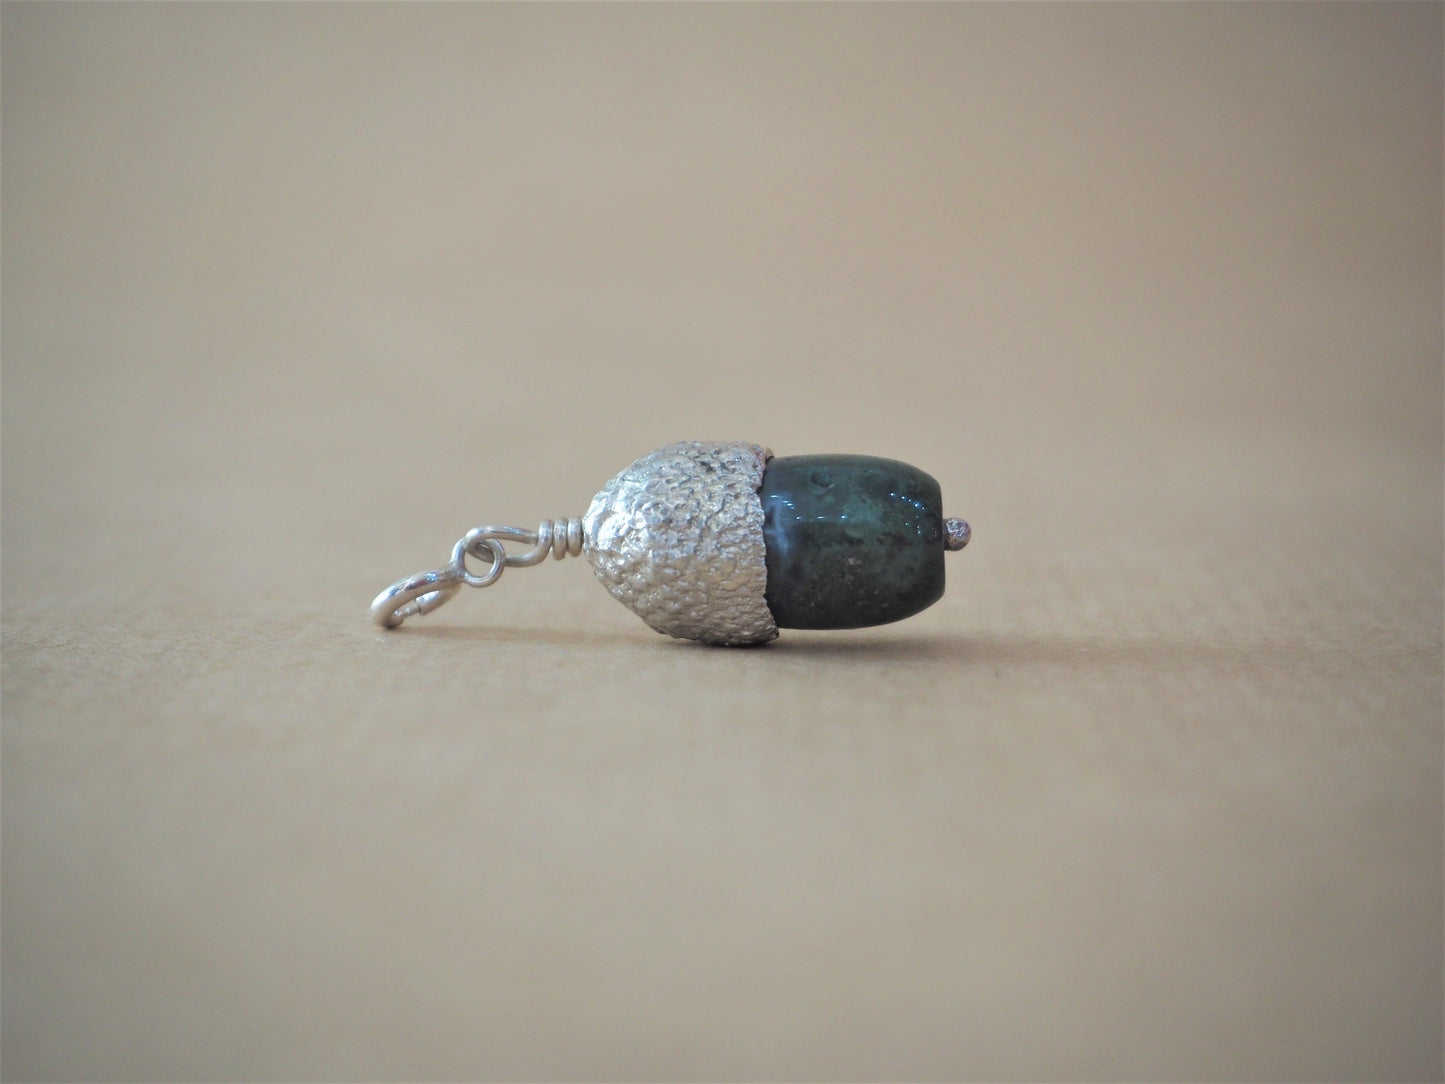 High, Charlie - Moss Agate and Silver Acorn Pendant